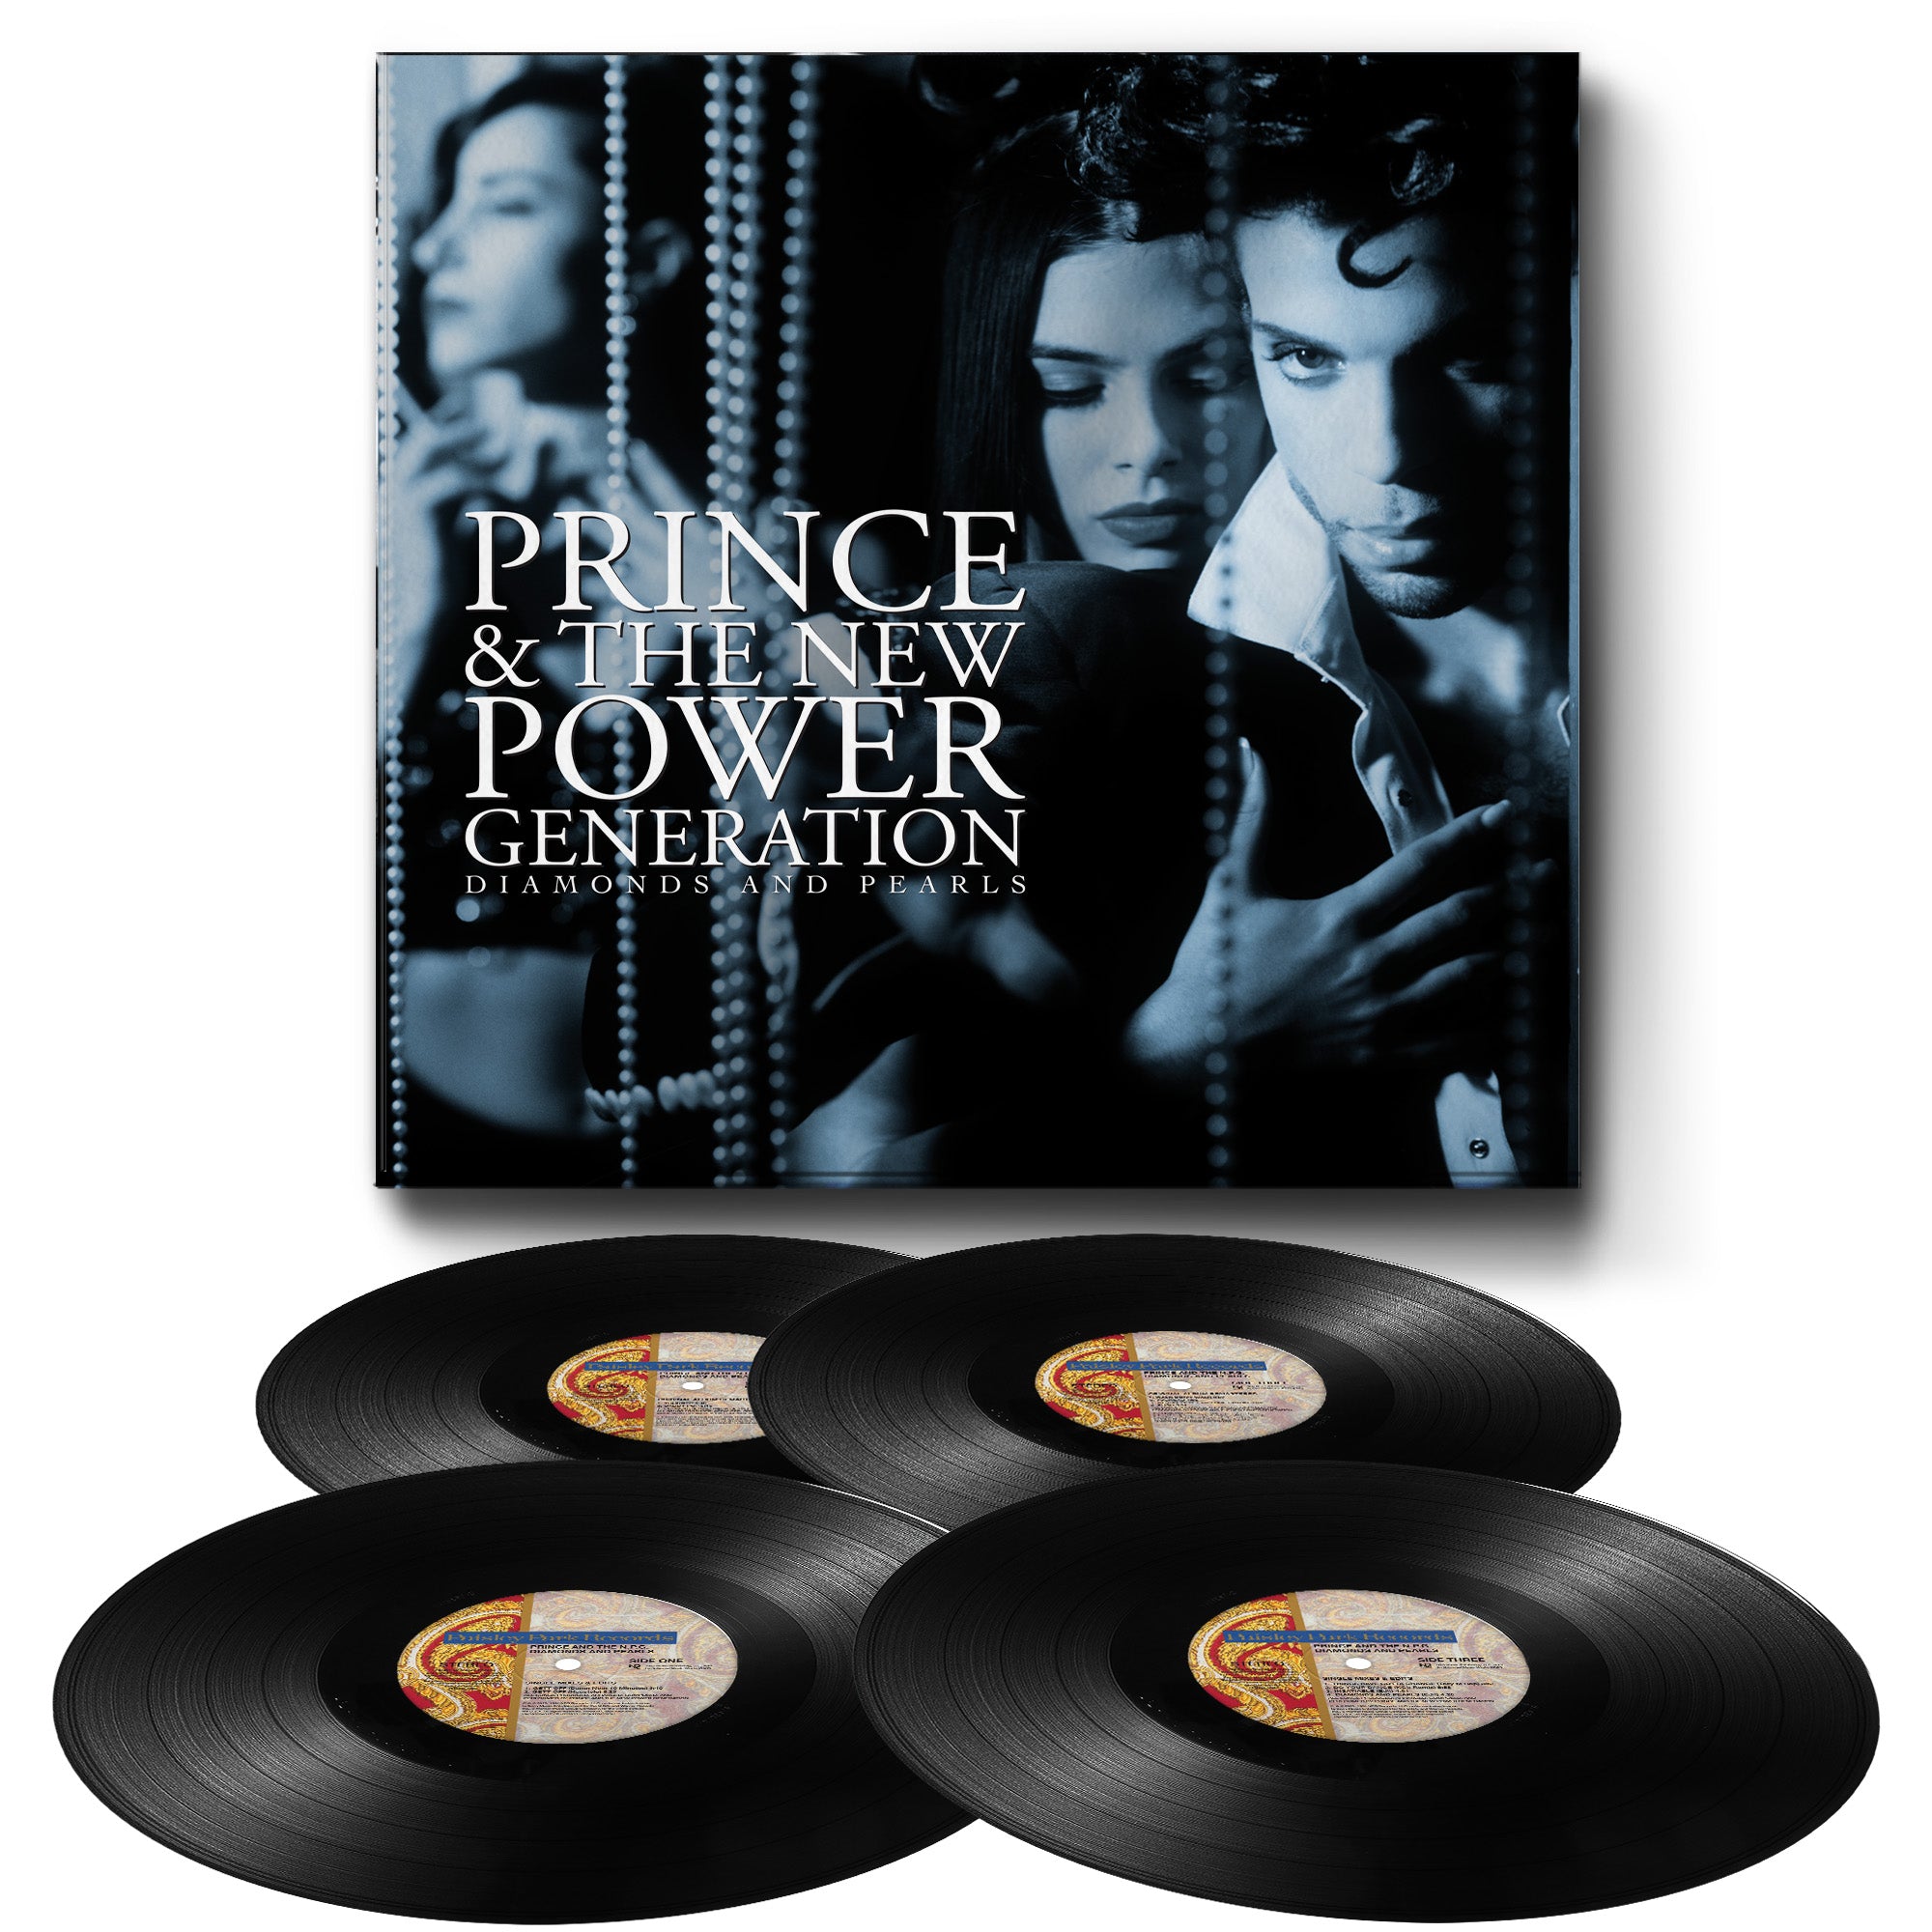 Prince & the New Power Generation - Diamonds & Pearls (4 LPs)